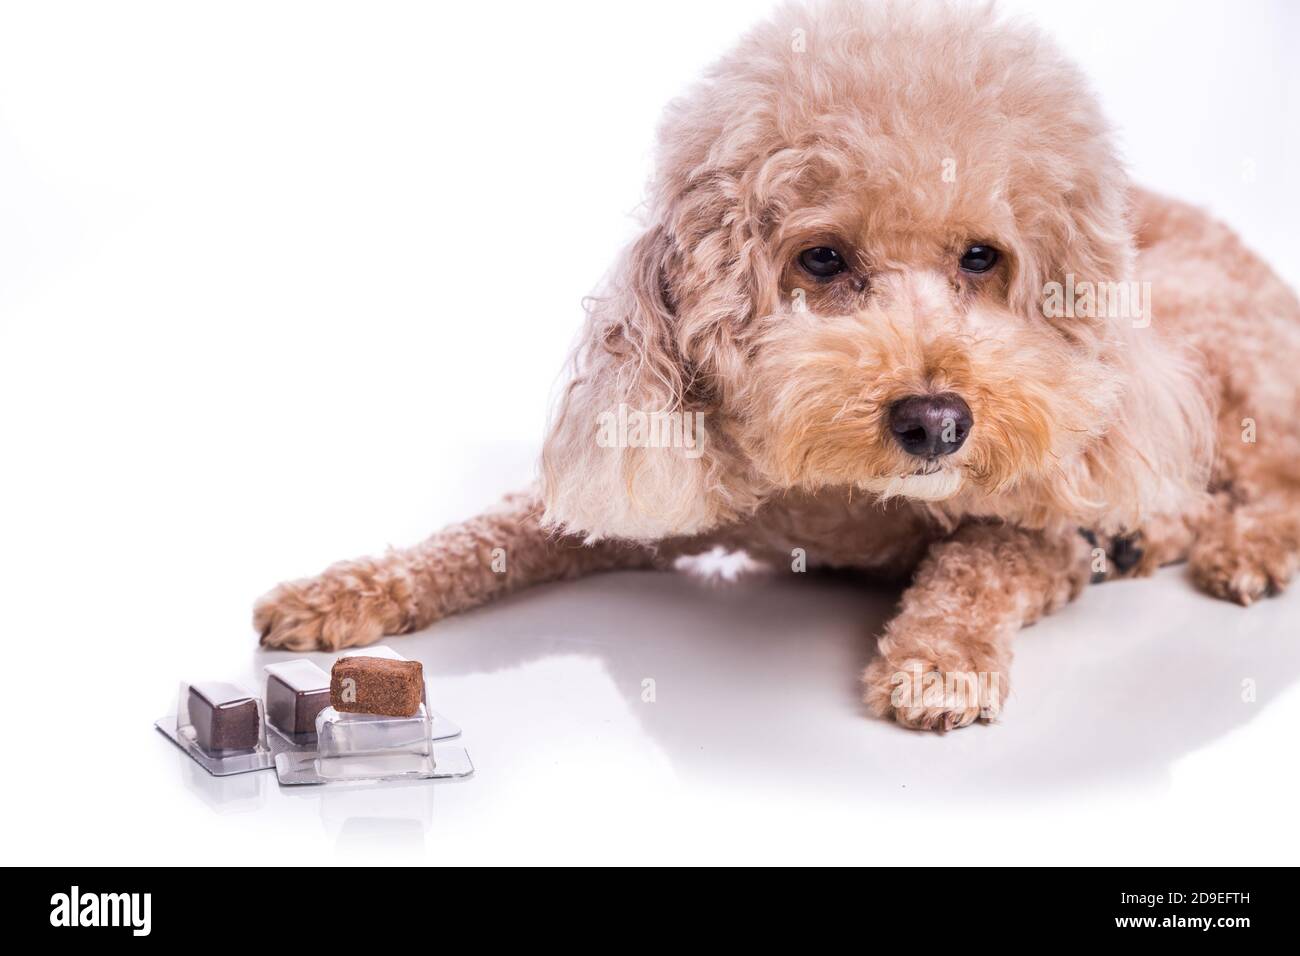 Poodle pet dog with beef chewables for heartworm protection treatment Stock Photo